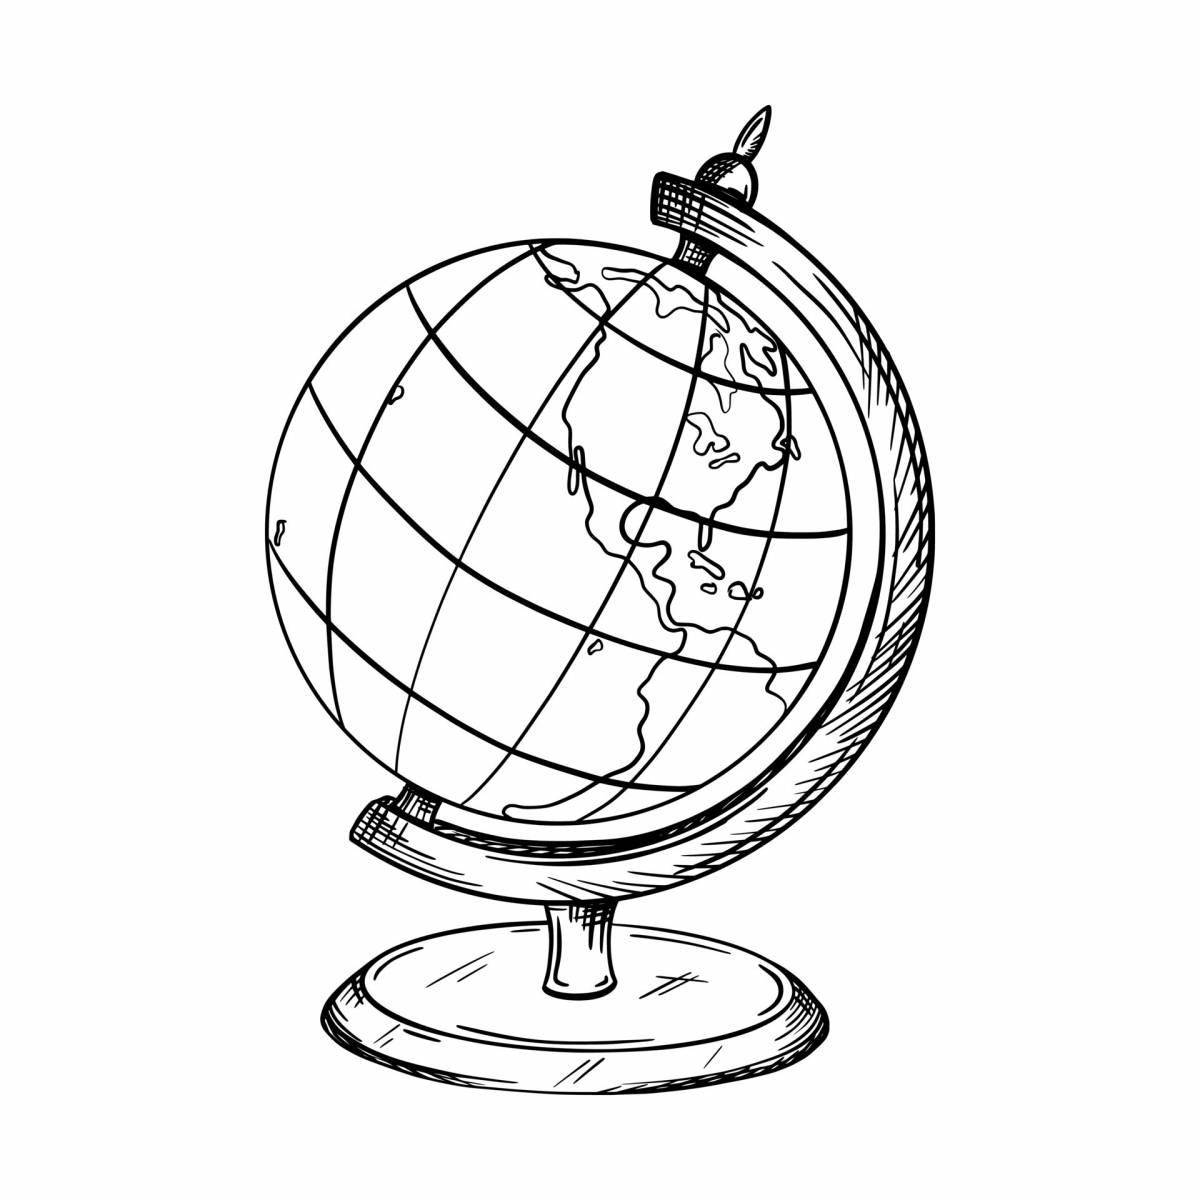 Coloring book playful globe for children 6-7 years old